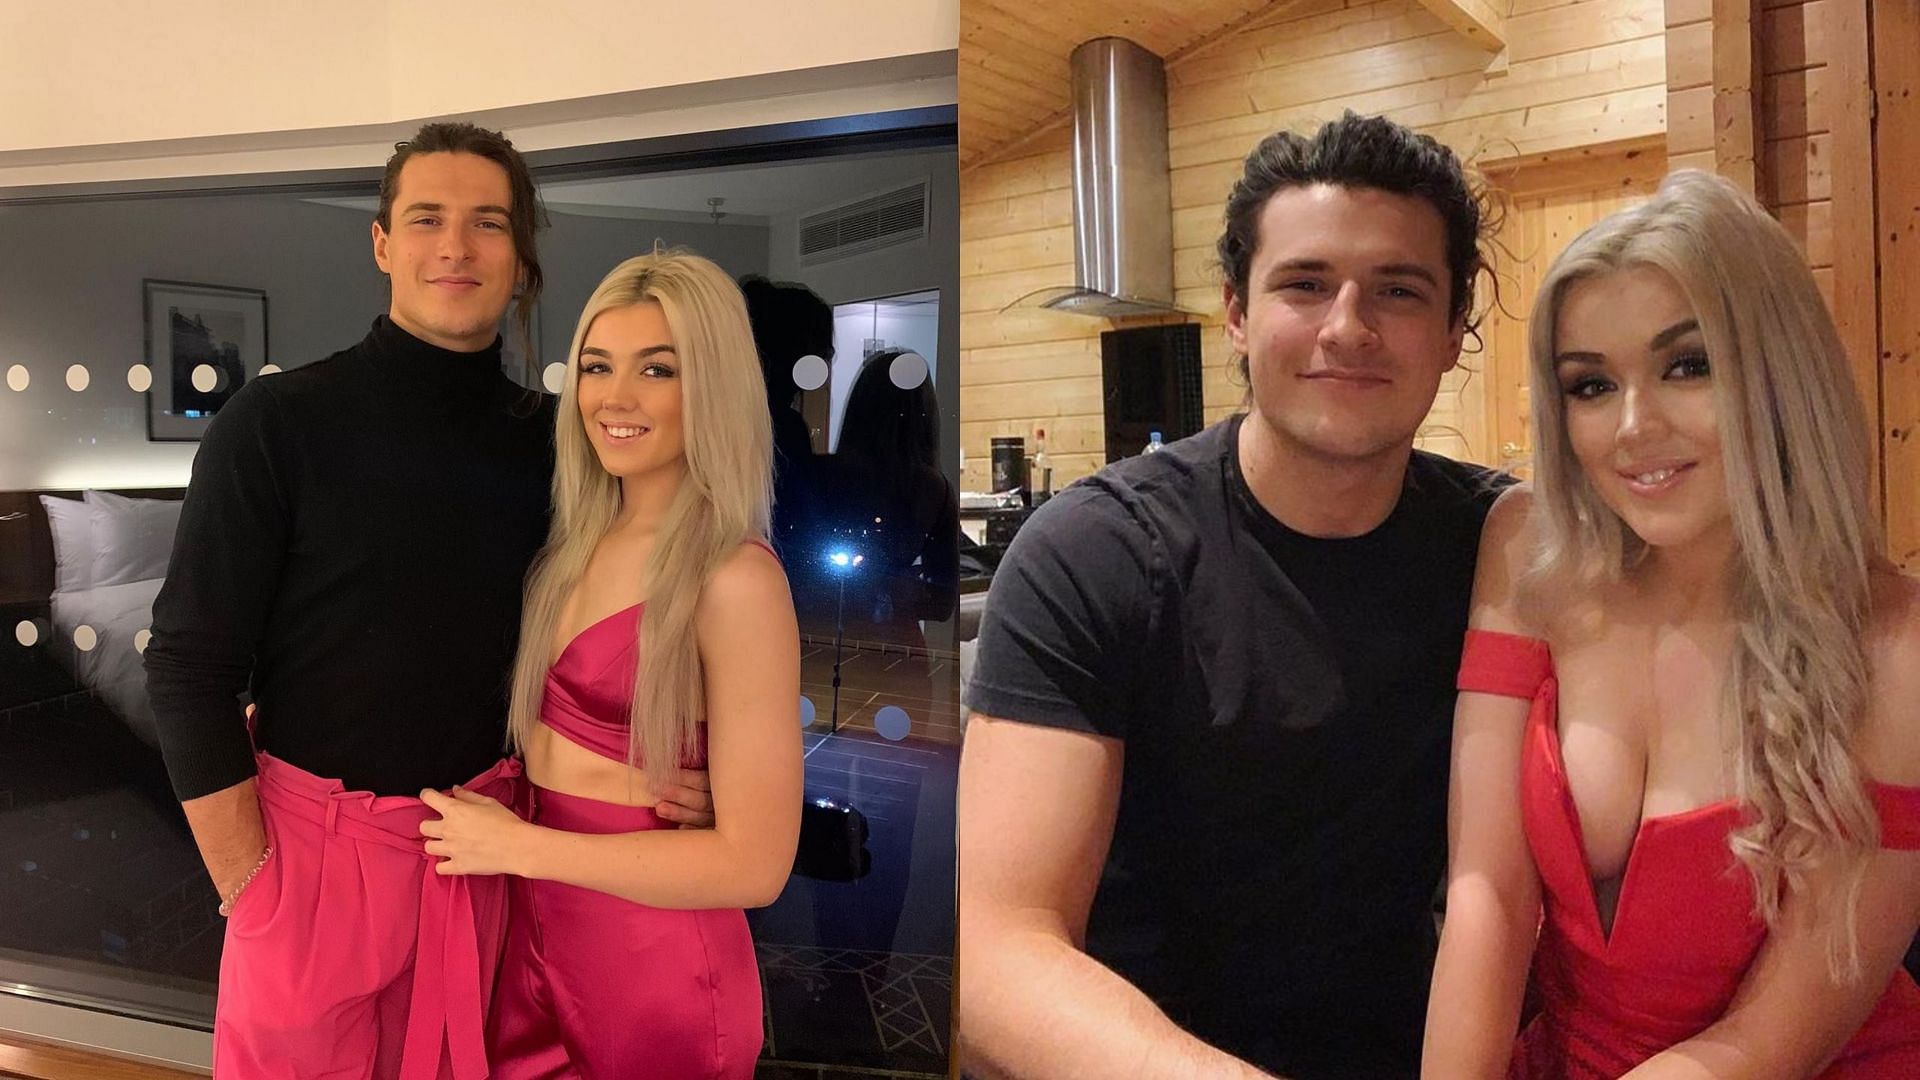 5 current WWE reallife couples you probably don't know